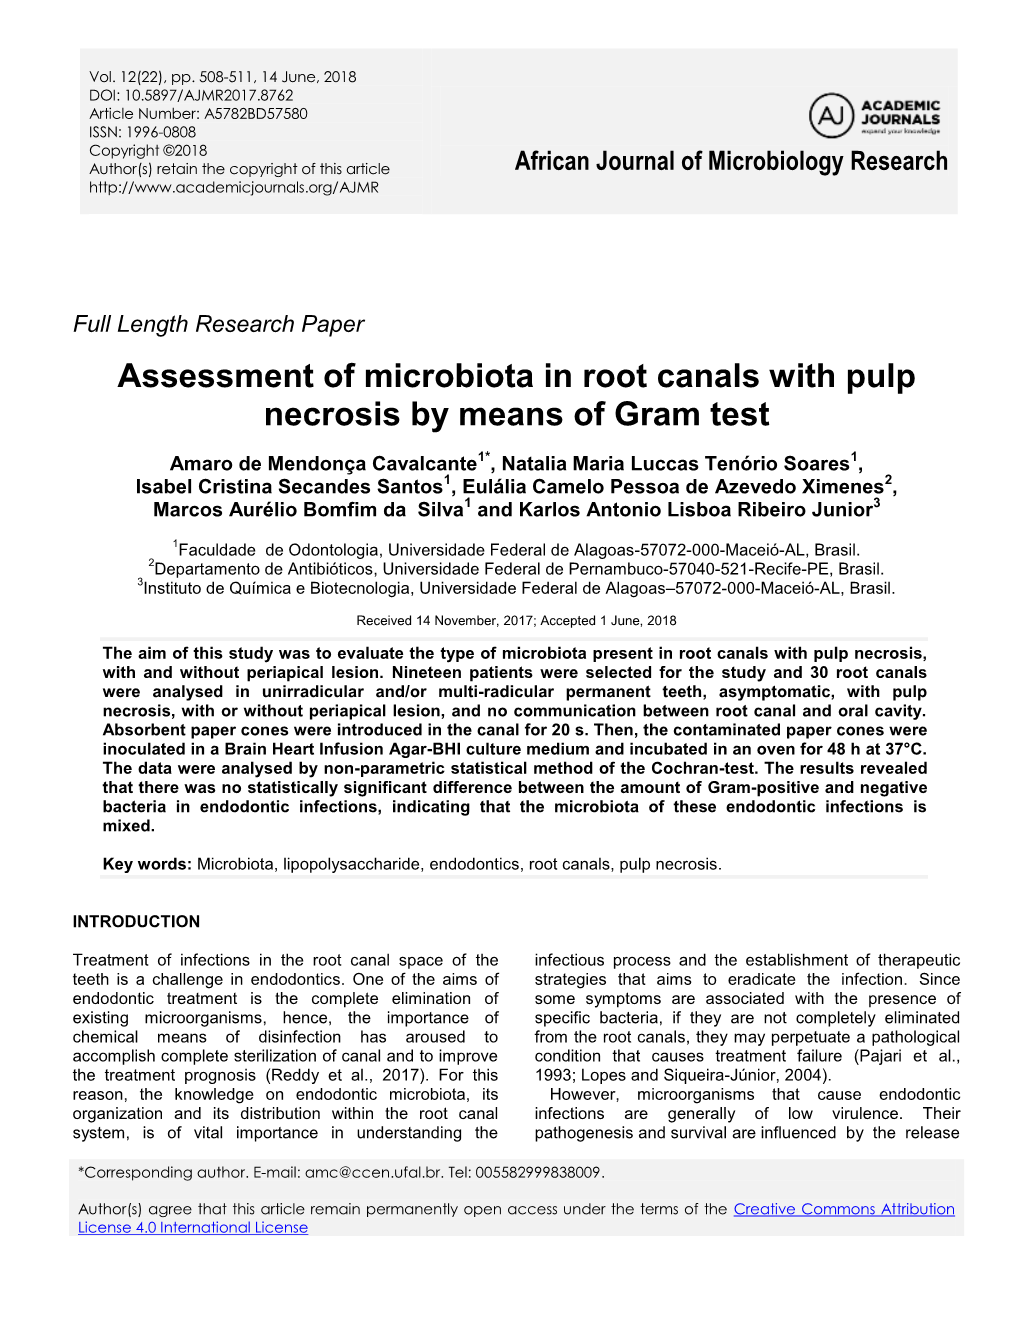 Assessment of Microbiota in Root Canals with Pulp Necrosis by Means of Gram Test